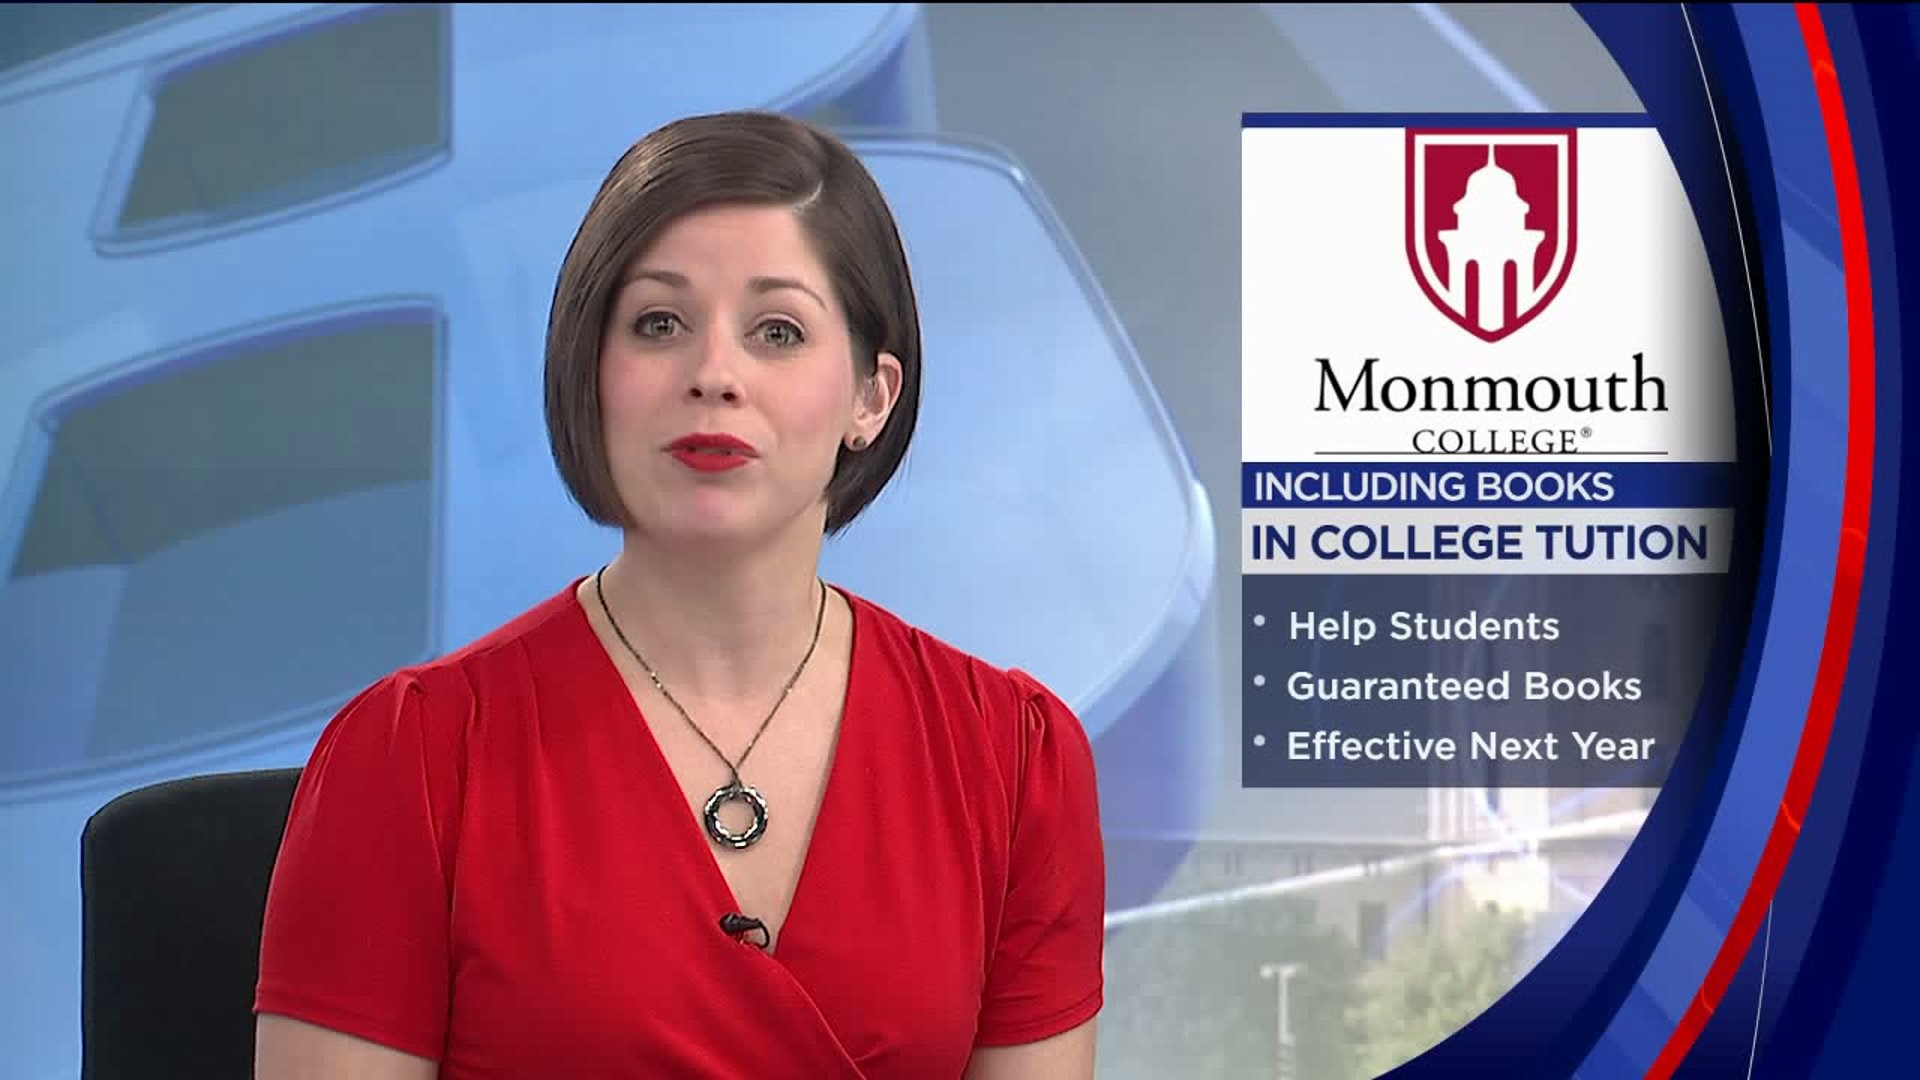 Monmouth College now includes textbooks in total tuition cost